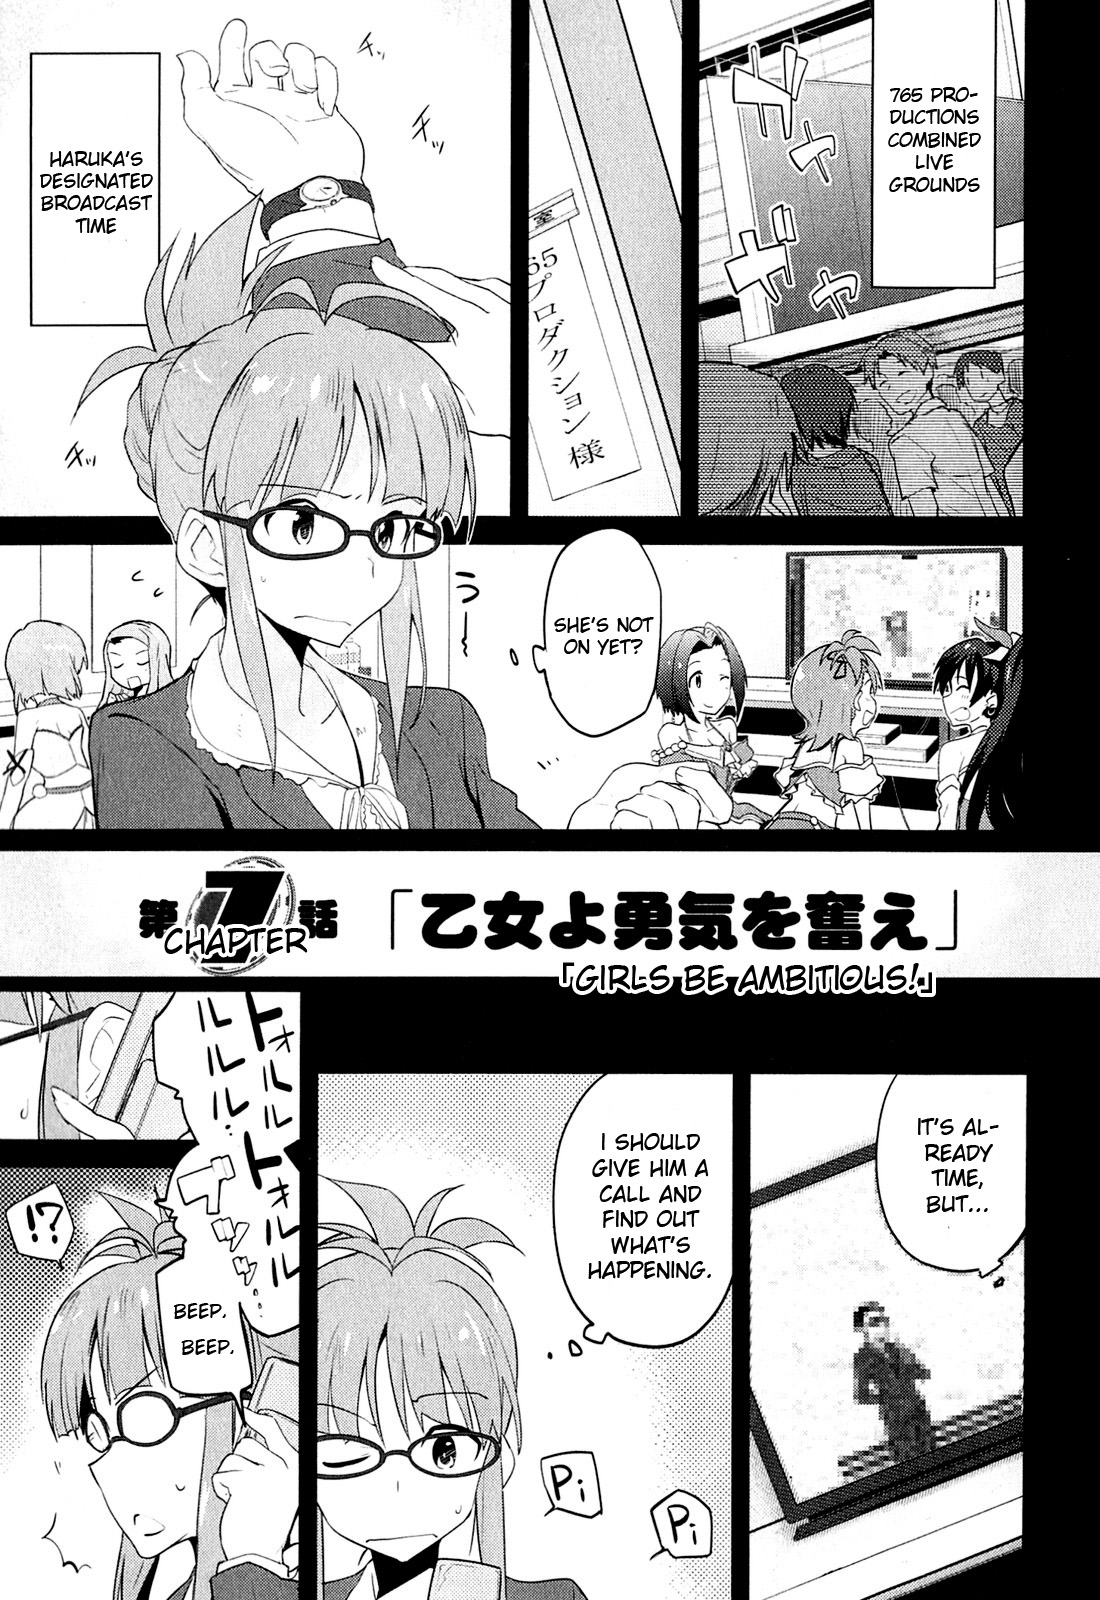 THE iDOLM@STER 2 The world is all one!! Vol. 1 Ch. 7 Girls Be Ambitious!